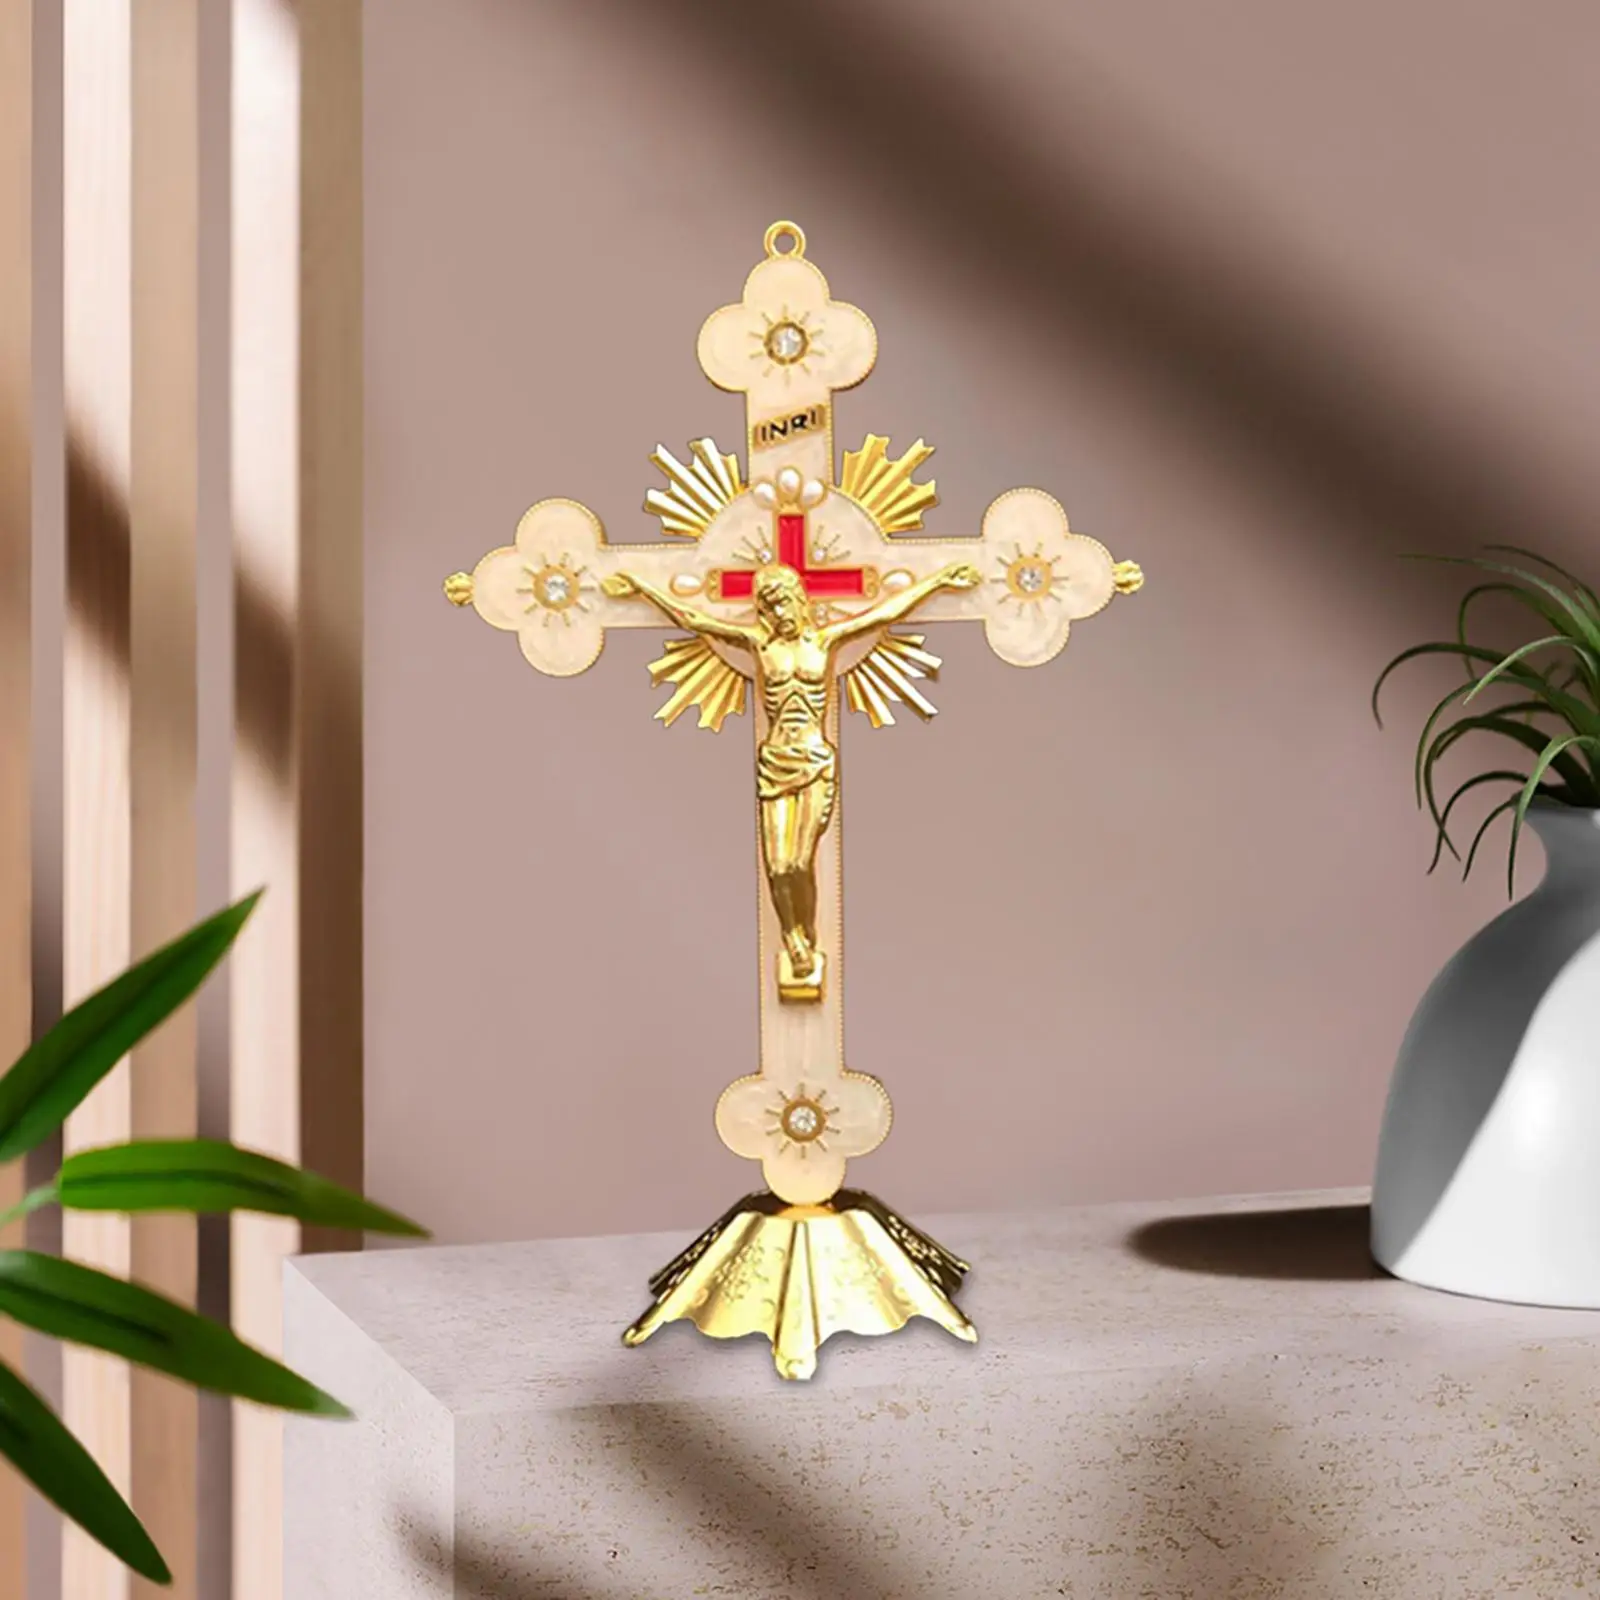 Standing Crucifix Collection Sculpture Catholic Jesus Cross Statue, Jesus Crucifix for Home Altar Tabletop Prayers Living Room